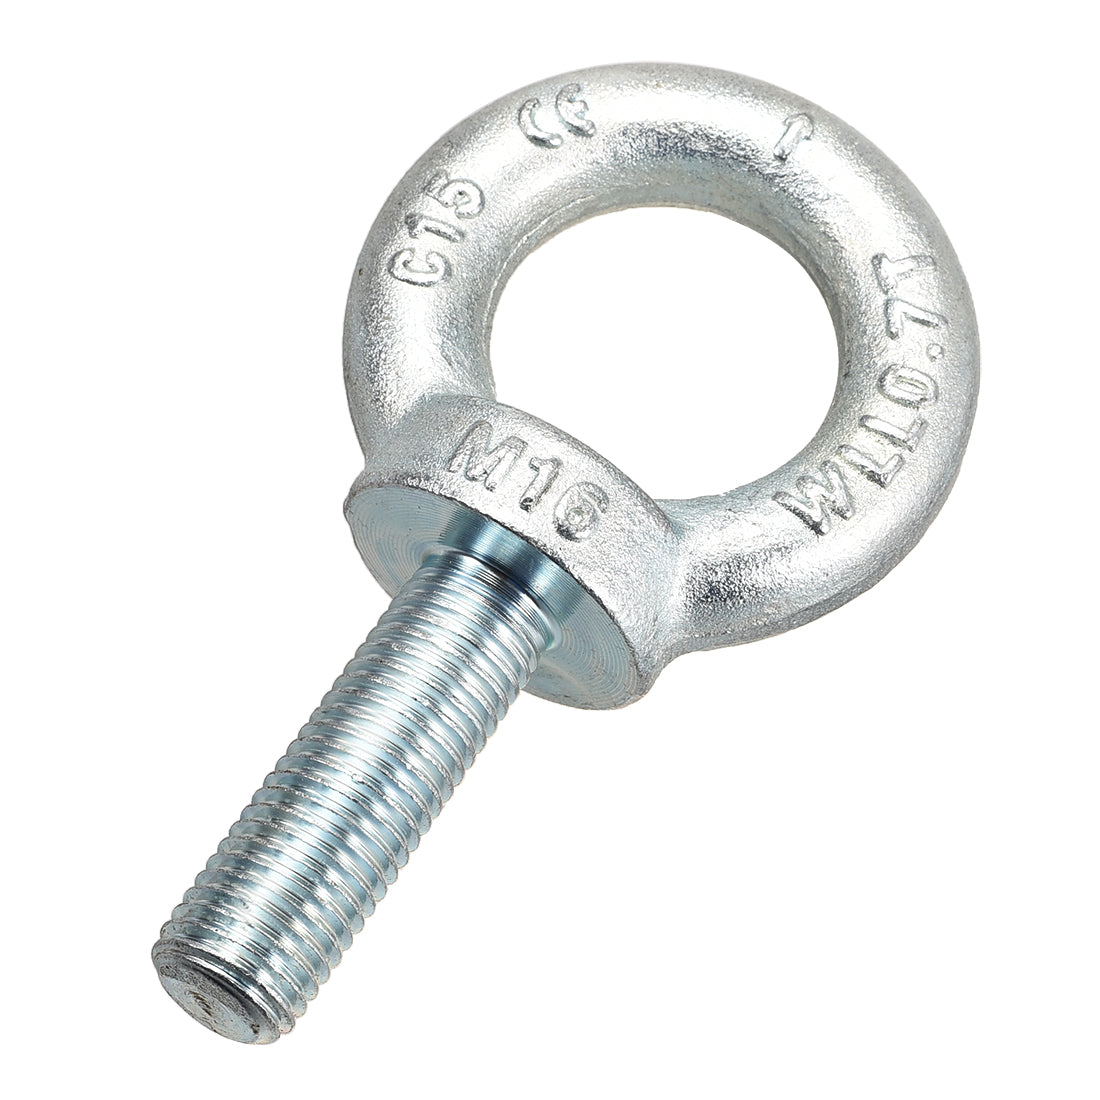 uxcell Uxcell M16x50mm Thread 35mm Inside Dia 63mm Outside Dia C15 Zinc Plated Lifting Eye Bolt